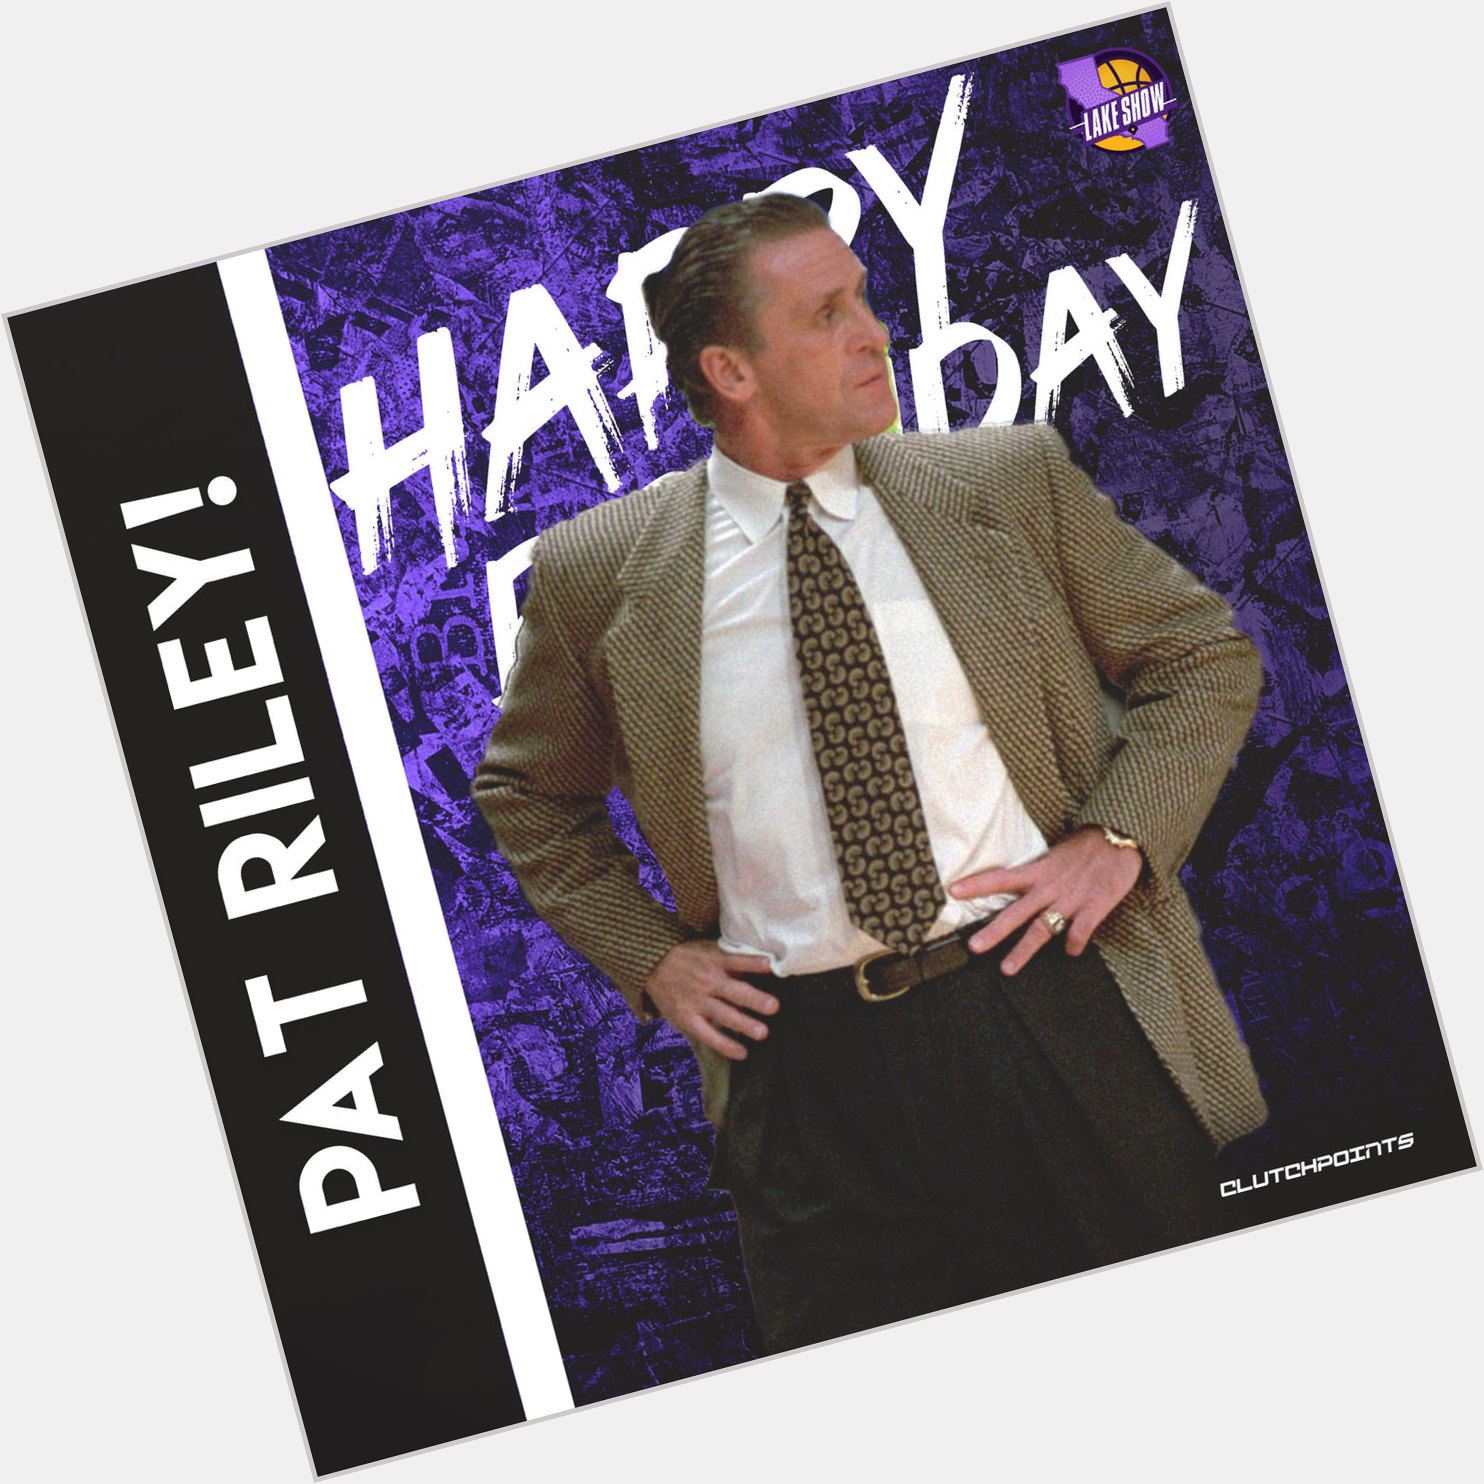 Lakers Nation, join us in wishing Pat Riley a happy 77th birthday! 